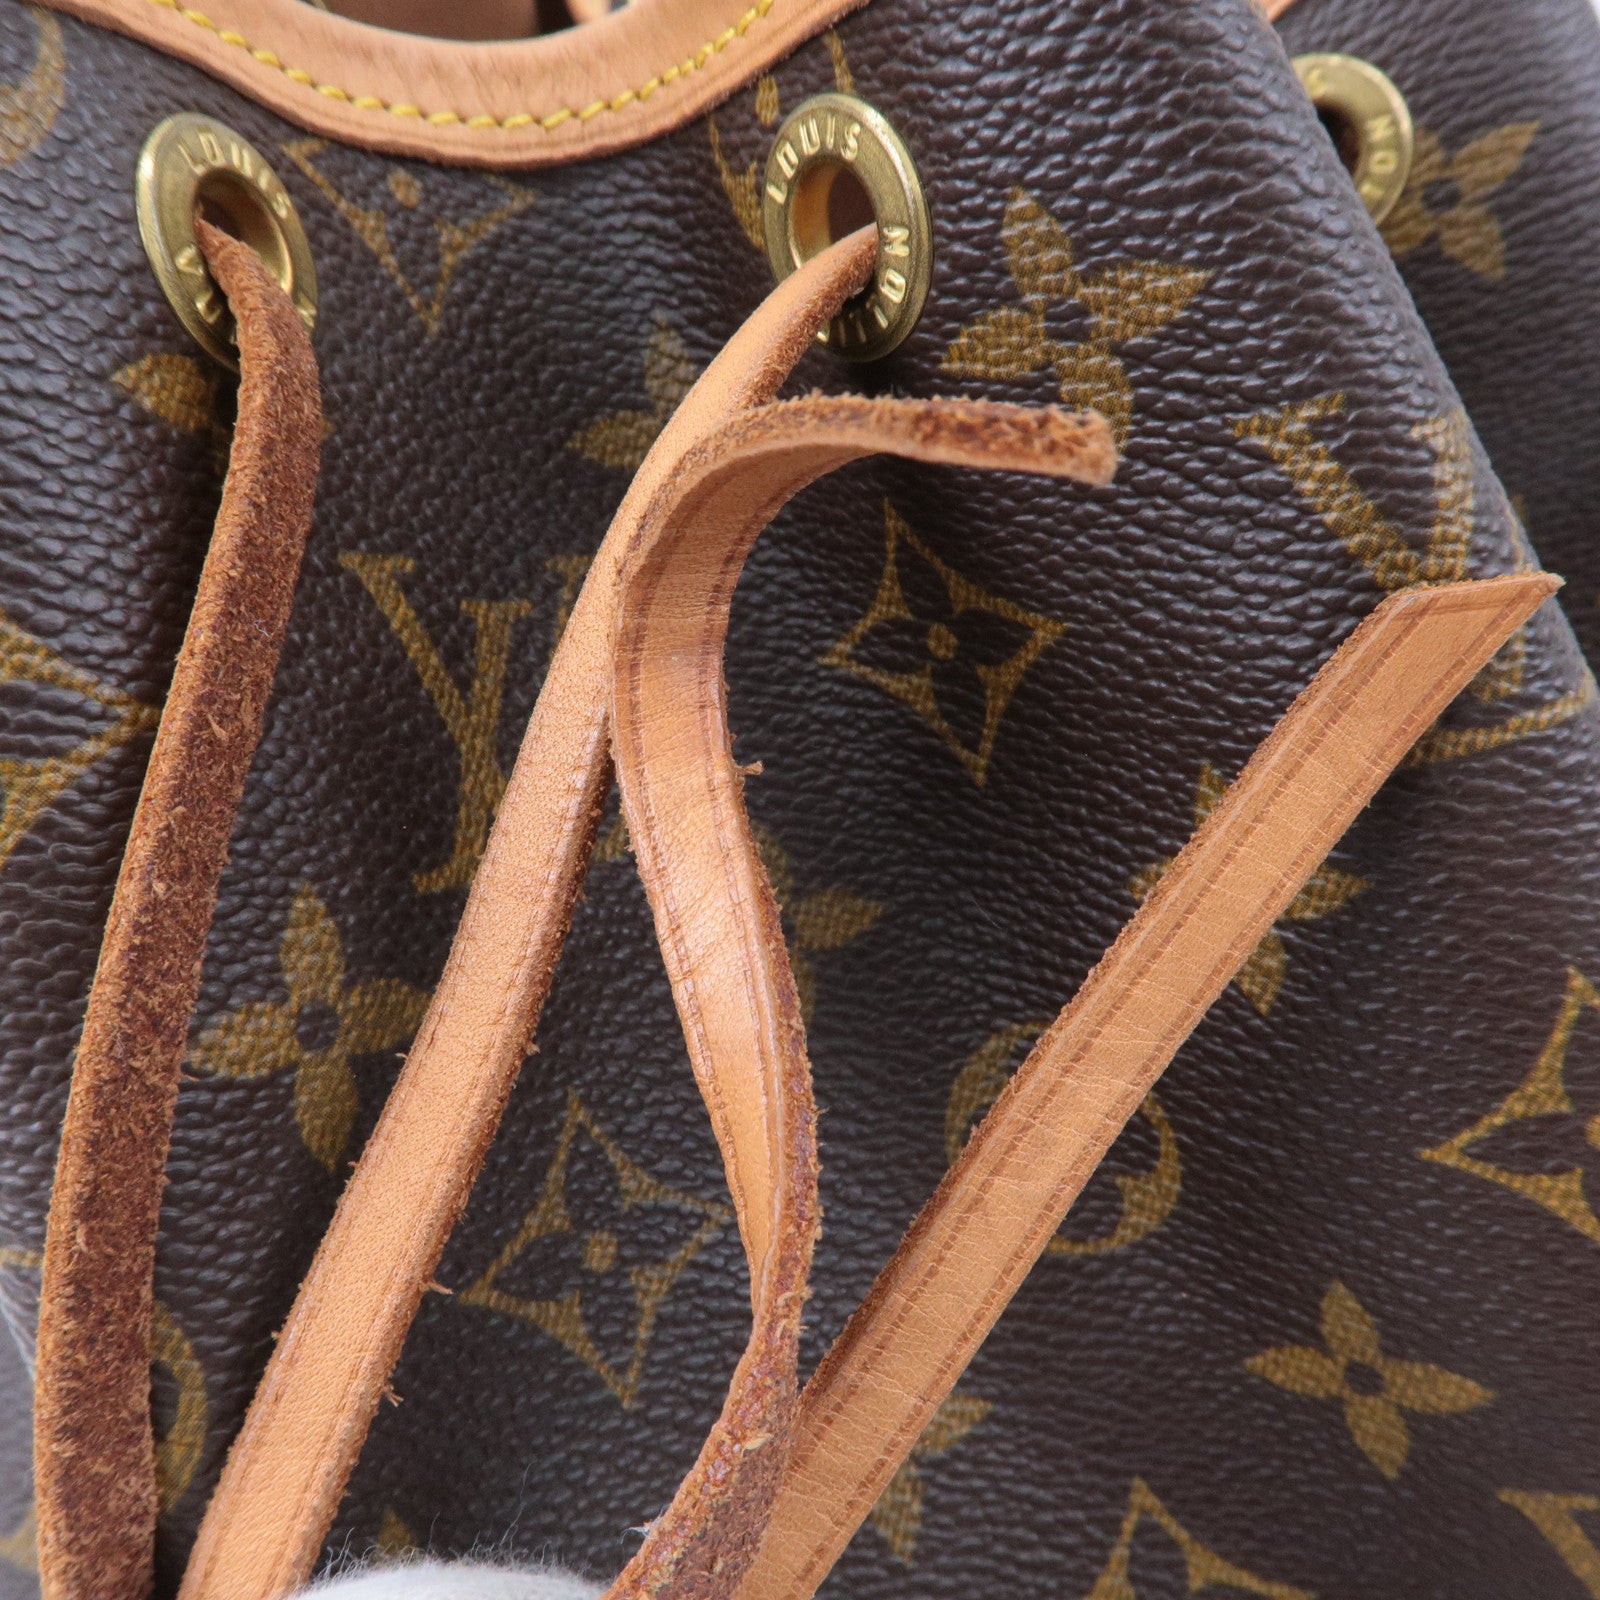 Louis - Bag - Vuitton - Monogram - Bag - Shoulder - Noe - M42224 – dct -  Hand - ep_vintage luxury Store - Kendall Jenner is back with her favorite  faux Louis Vuitton - Brown